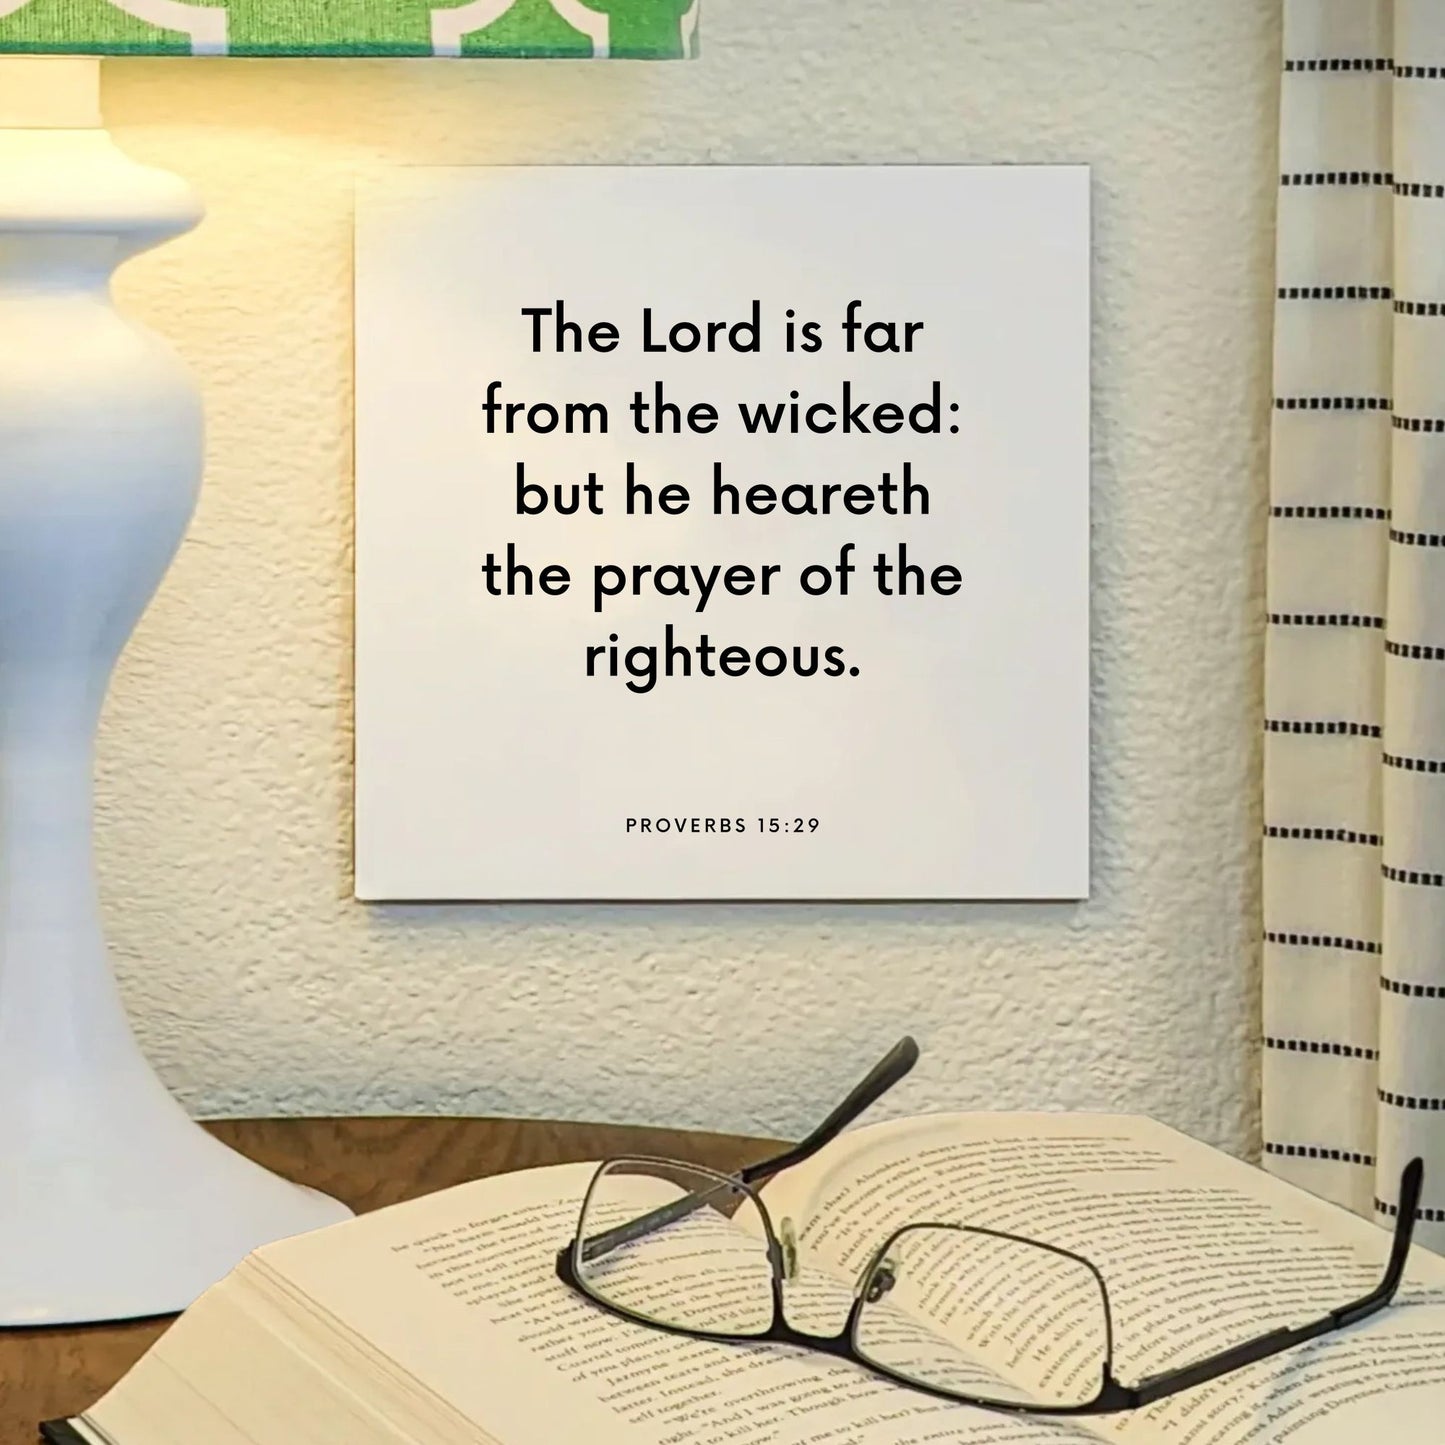 Lamp mouting of the scripture tile for Proverbs 15:29 - "He heareth the prayer of the righteous"